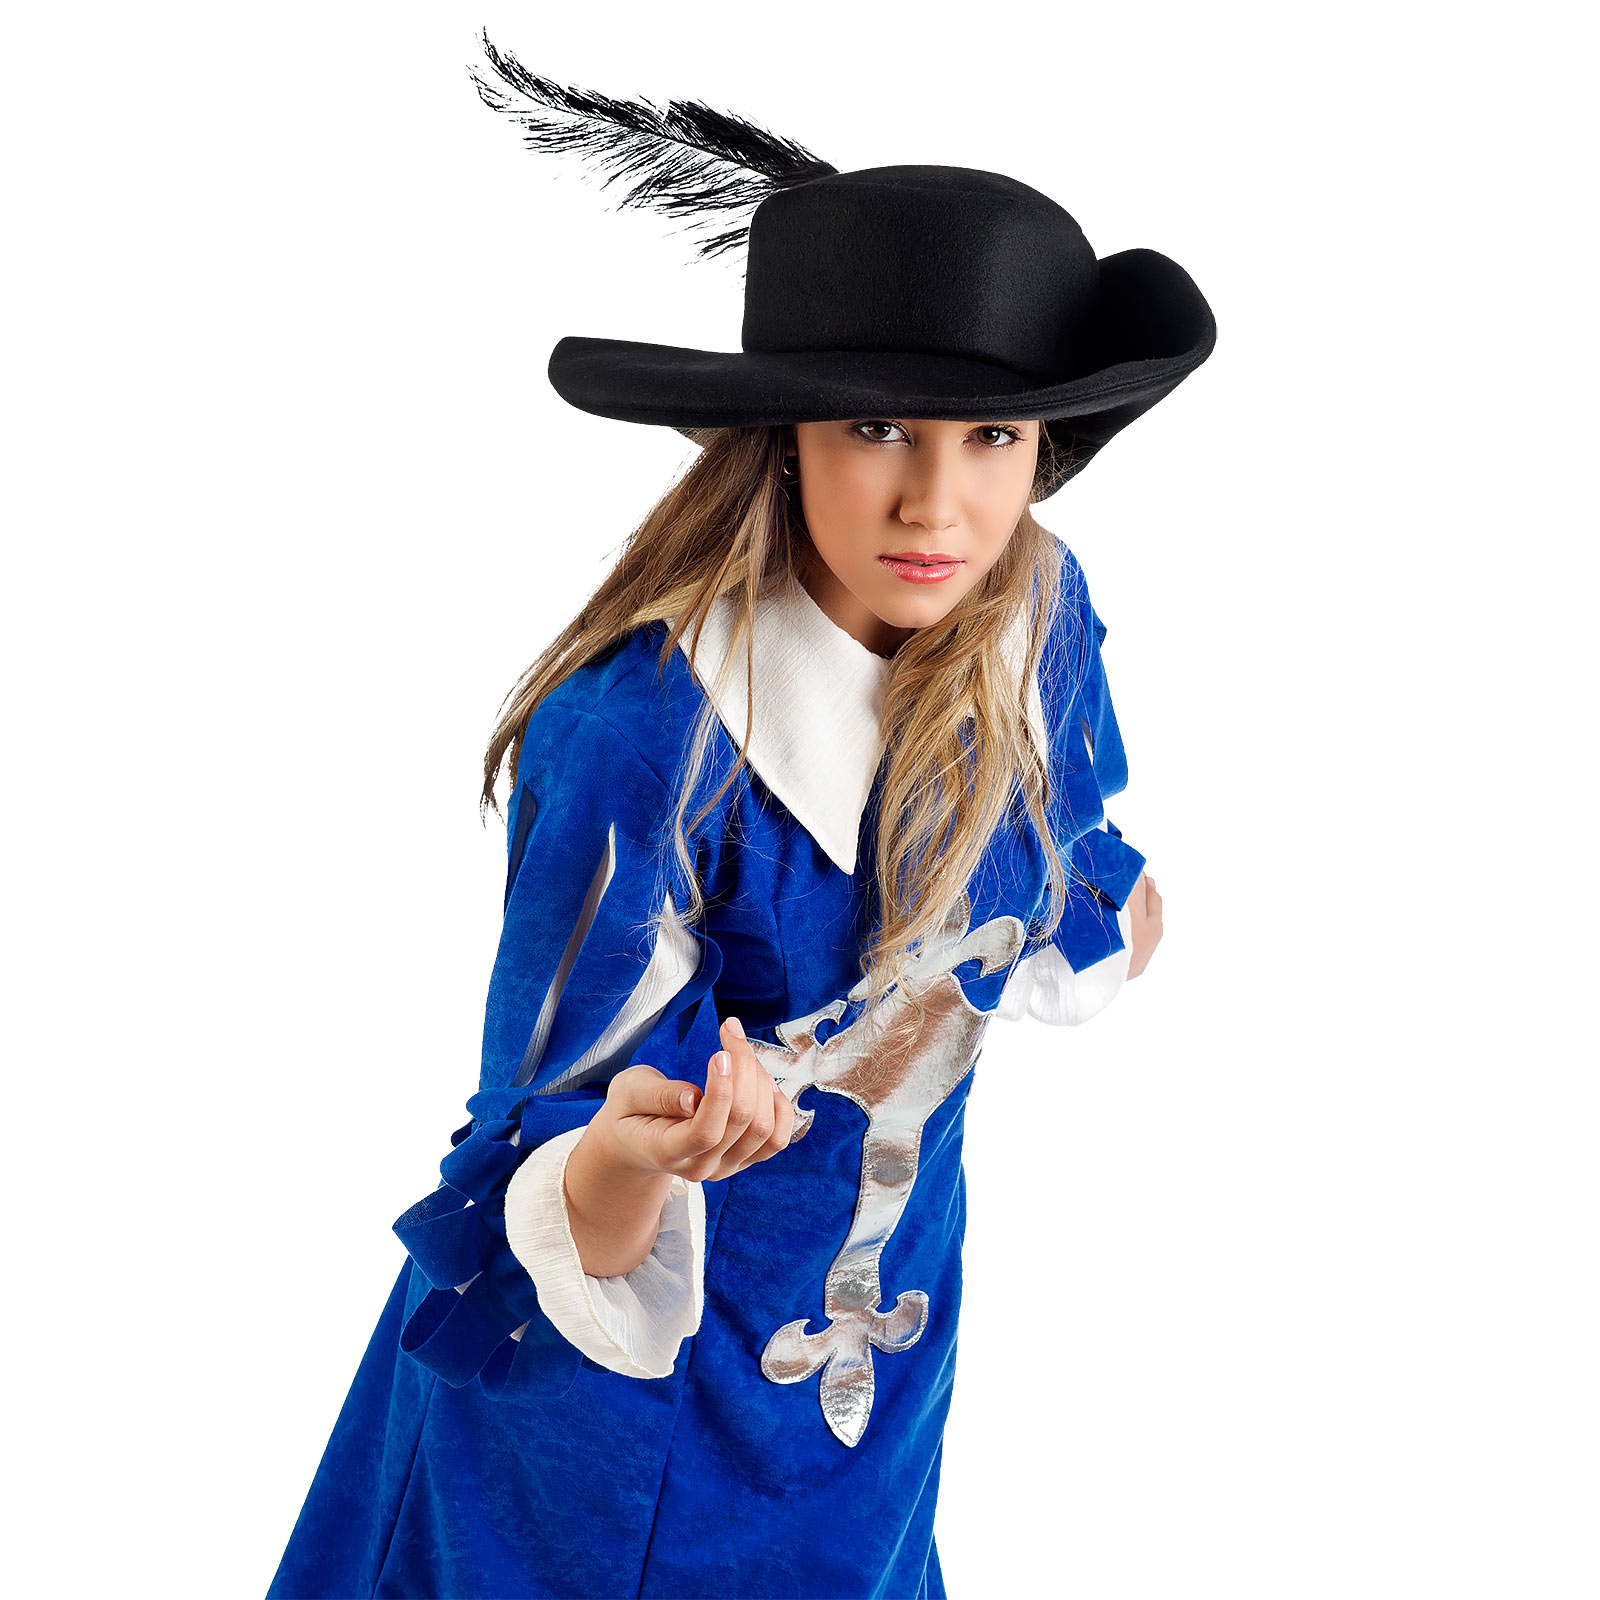 Royal Musketeer Lady - Women's Costume Blue